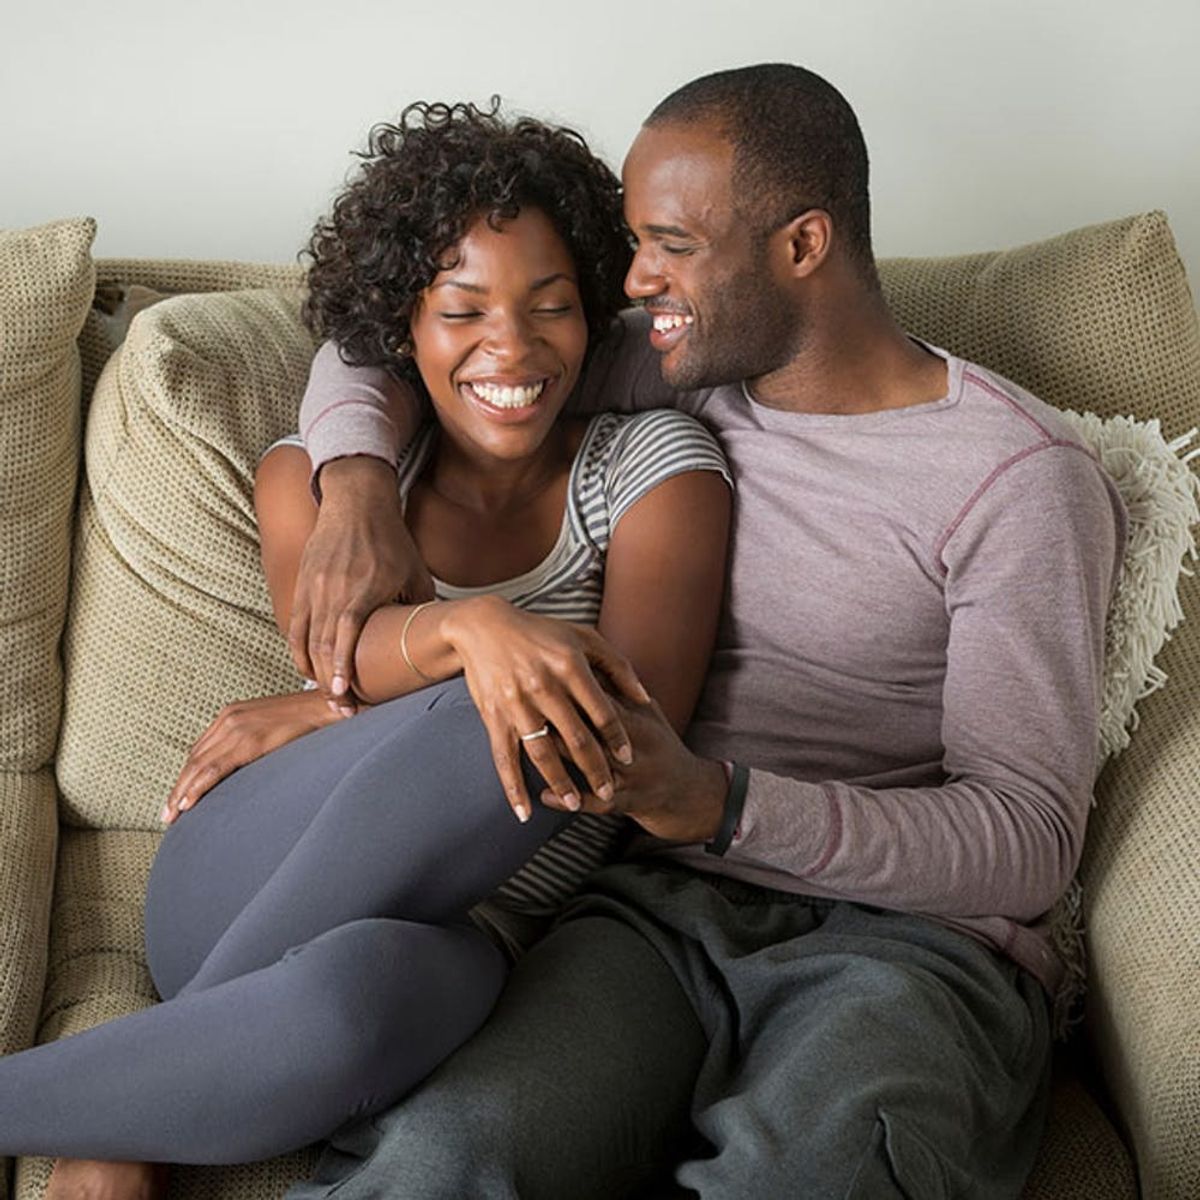 Why Cuddling Is So Good for Your Health